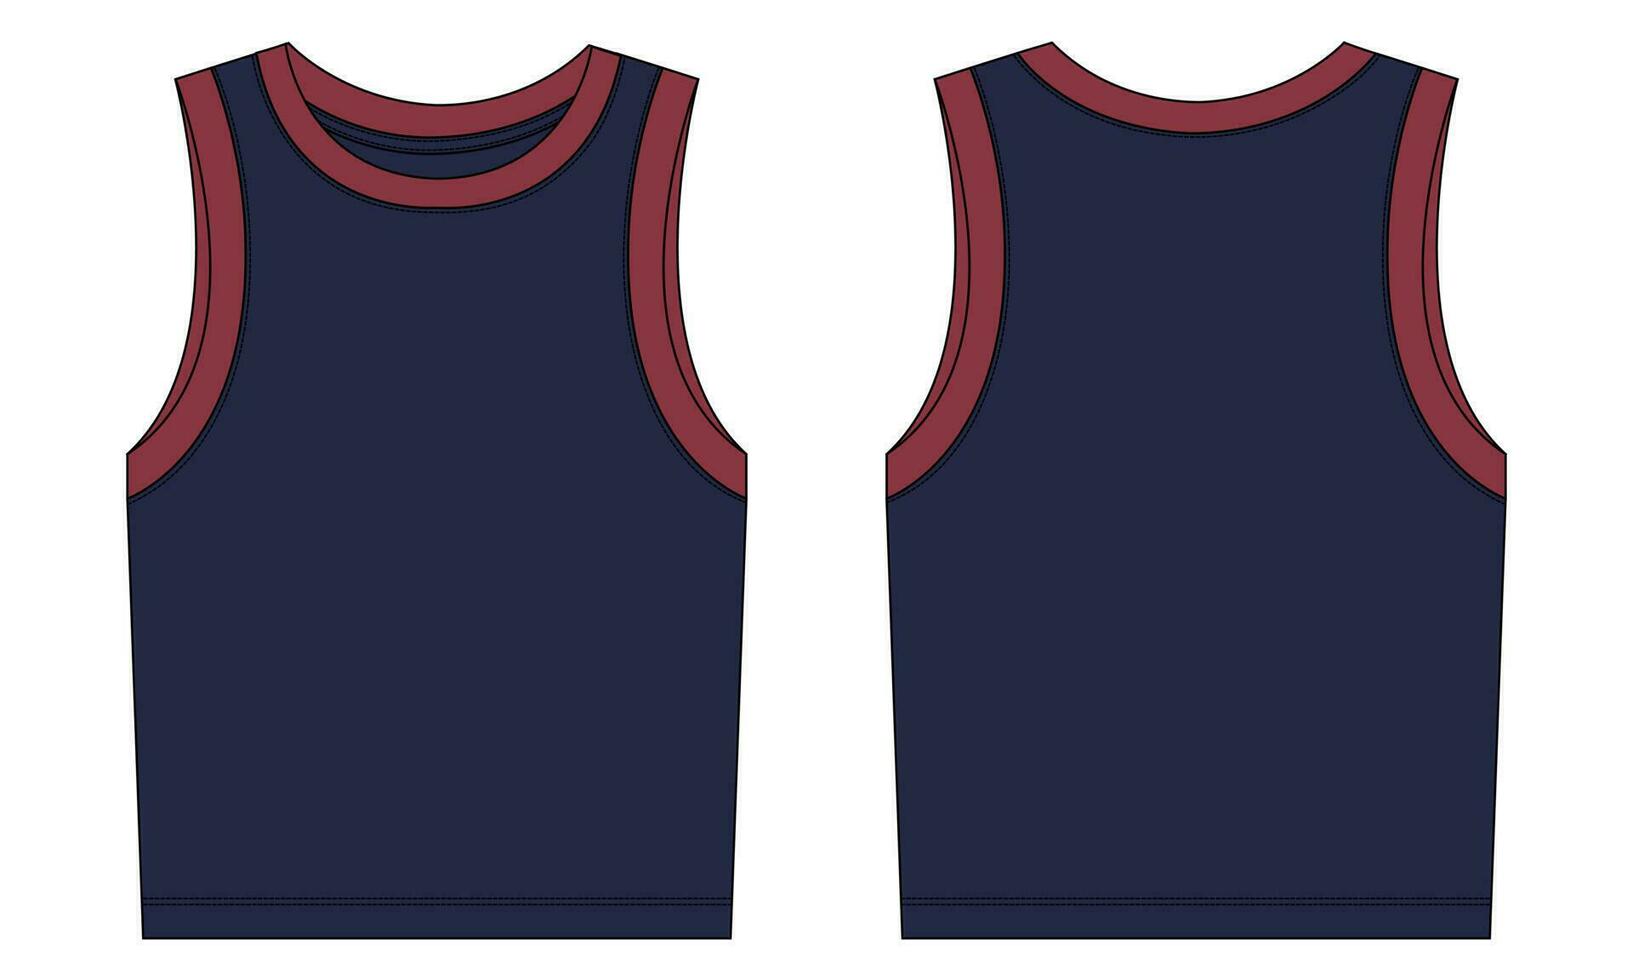 Navy Blue Color Tank Tops Technical Fashion flat sketch vector illustration template Front and back views. Apparel tank tops mock up for men's and boys.